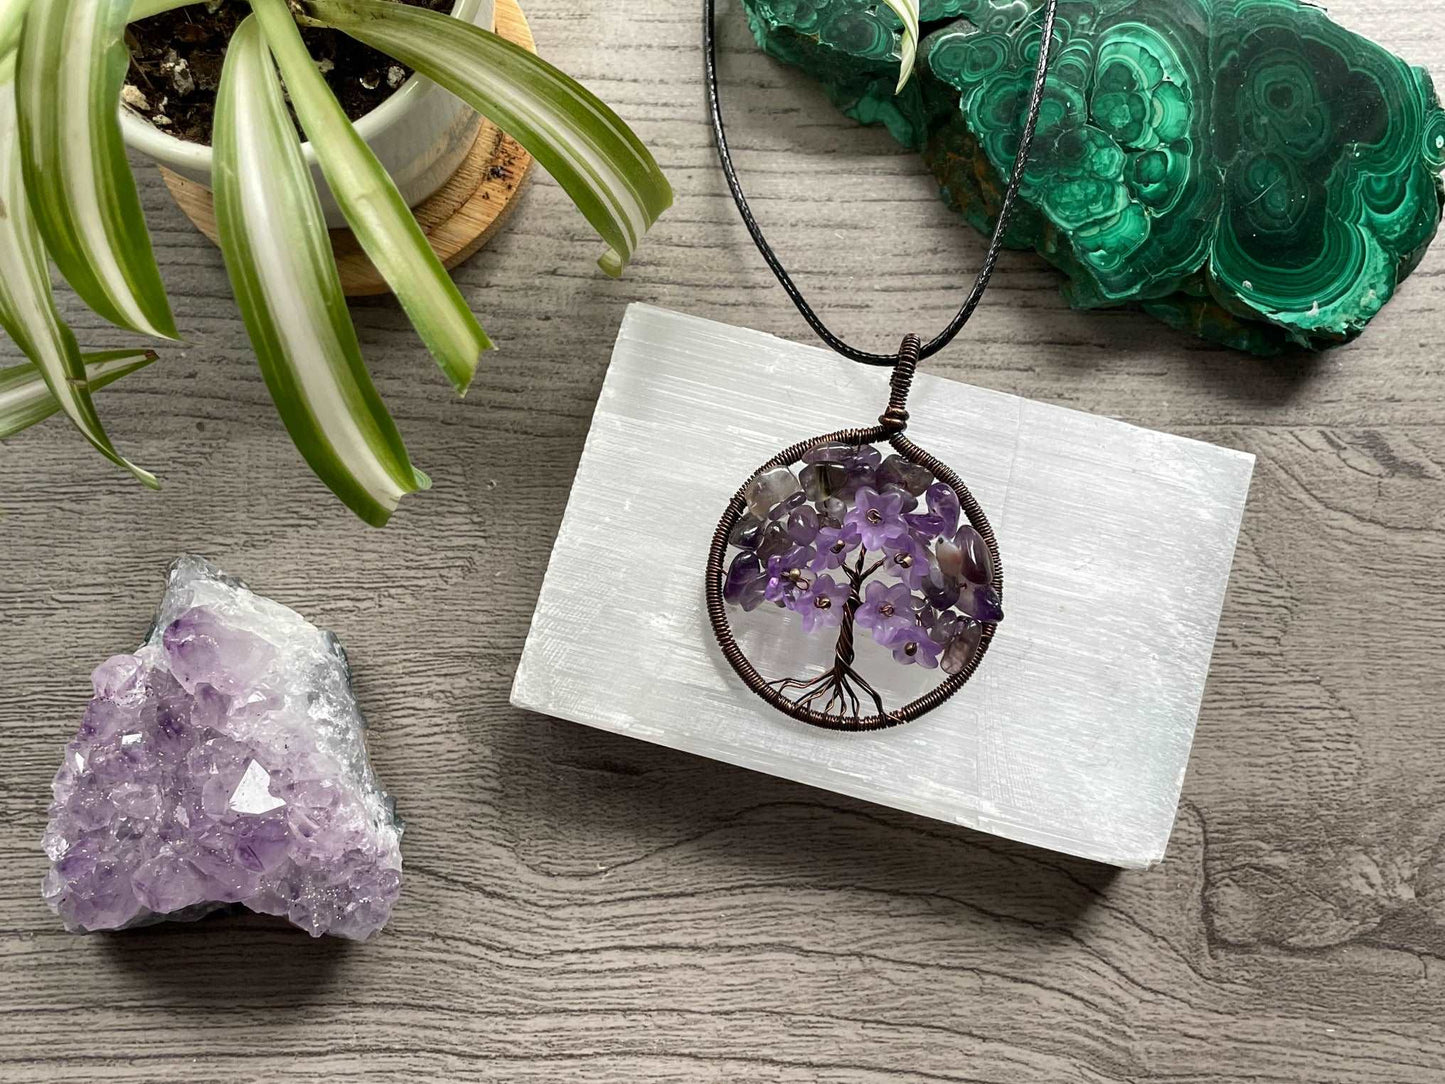 An image of a necklace featuring a wire-wrapped pendant. The wire is in the shape of a tree and the leaves on the tree are polished chips of amethyst.